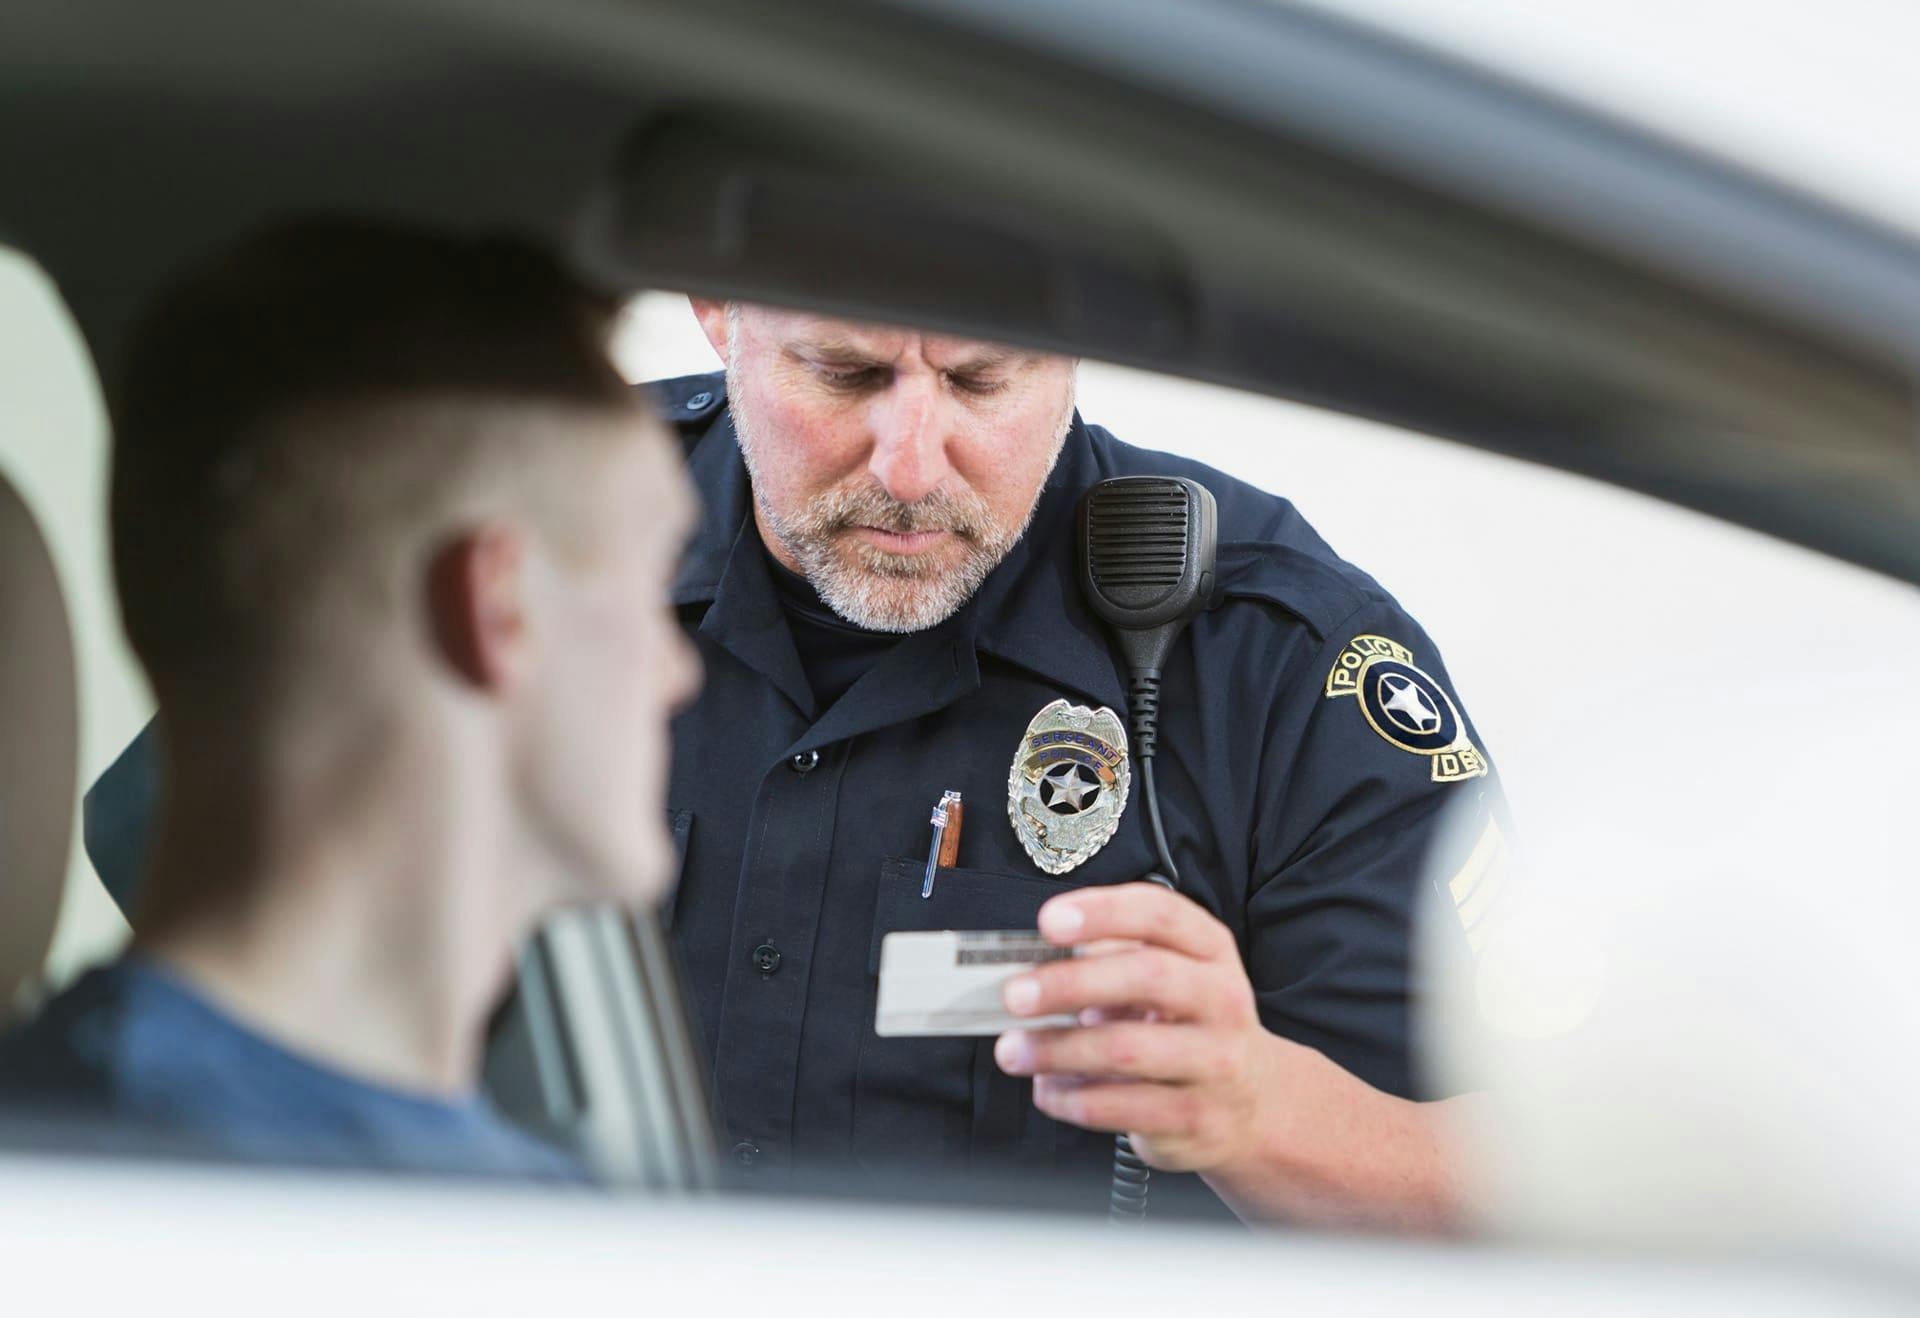 Officer looking at a man's license.